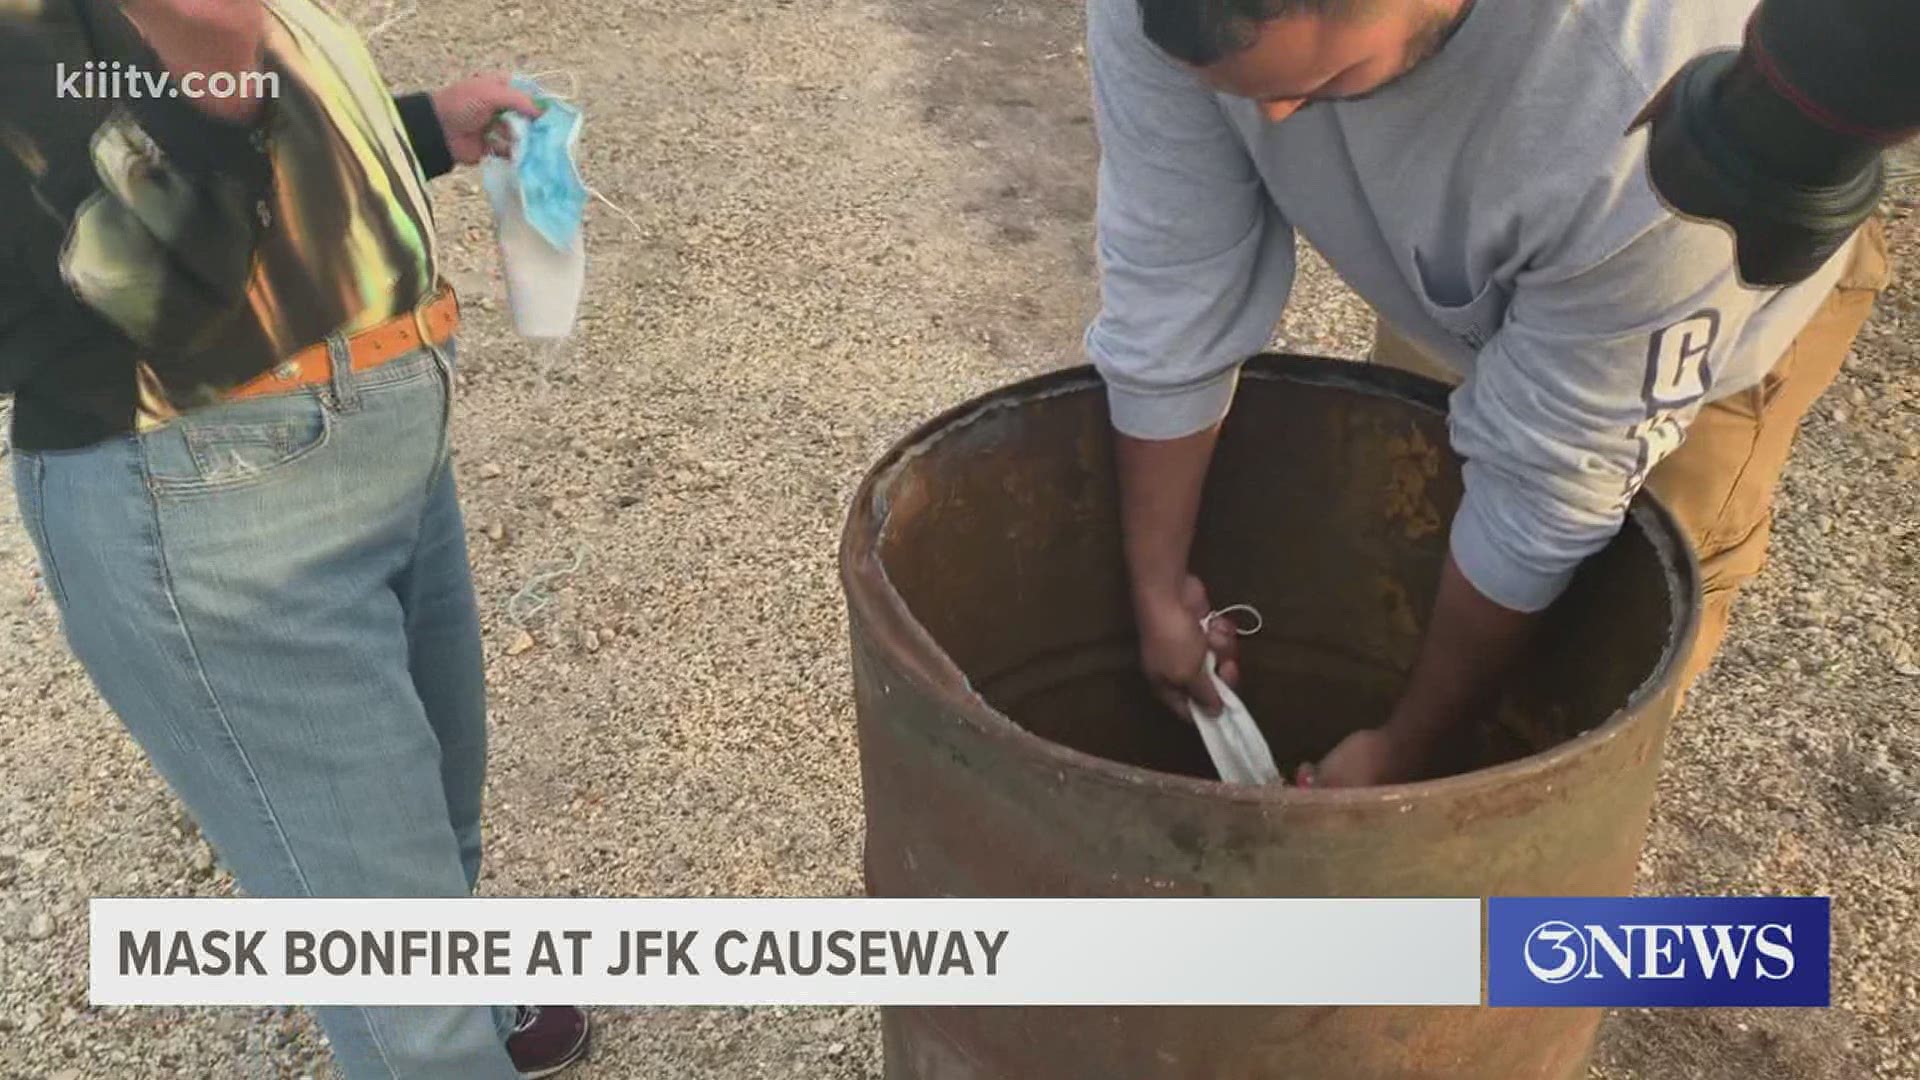 Several residents gathered at the JFK Causeway Wednesday evening for a mask bonfire.